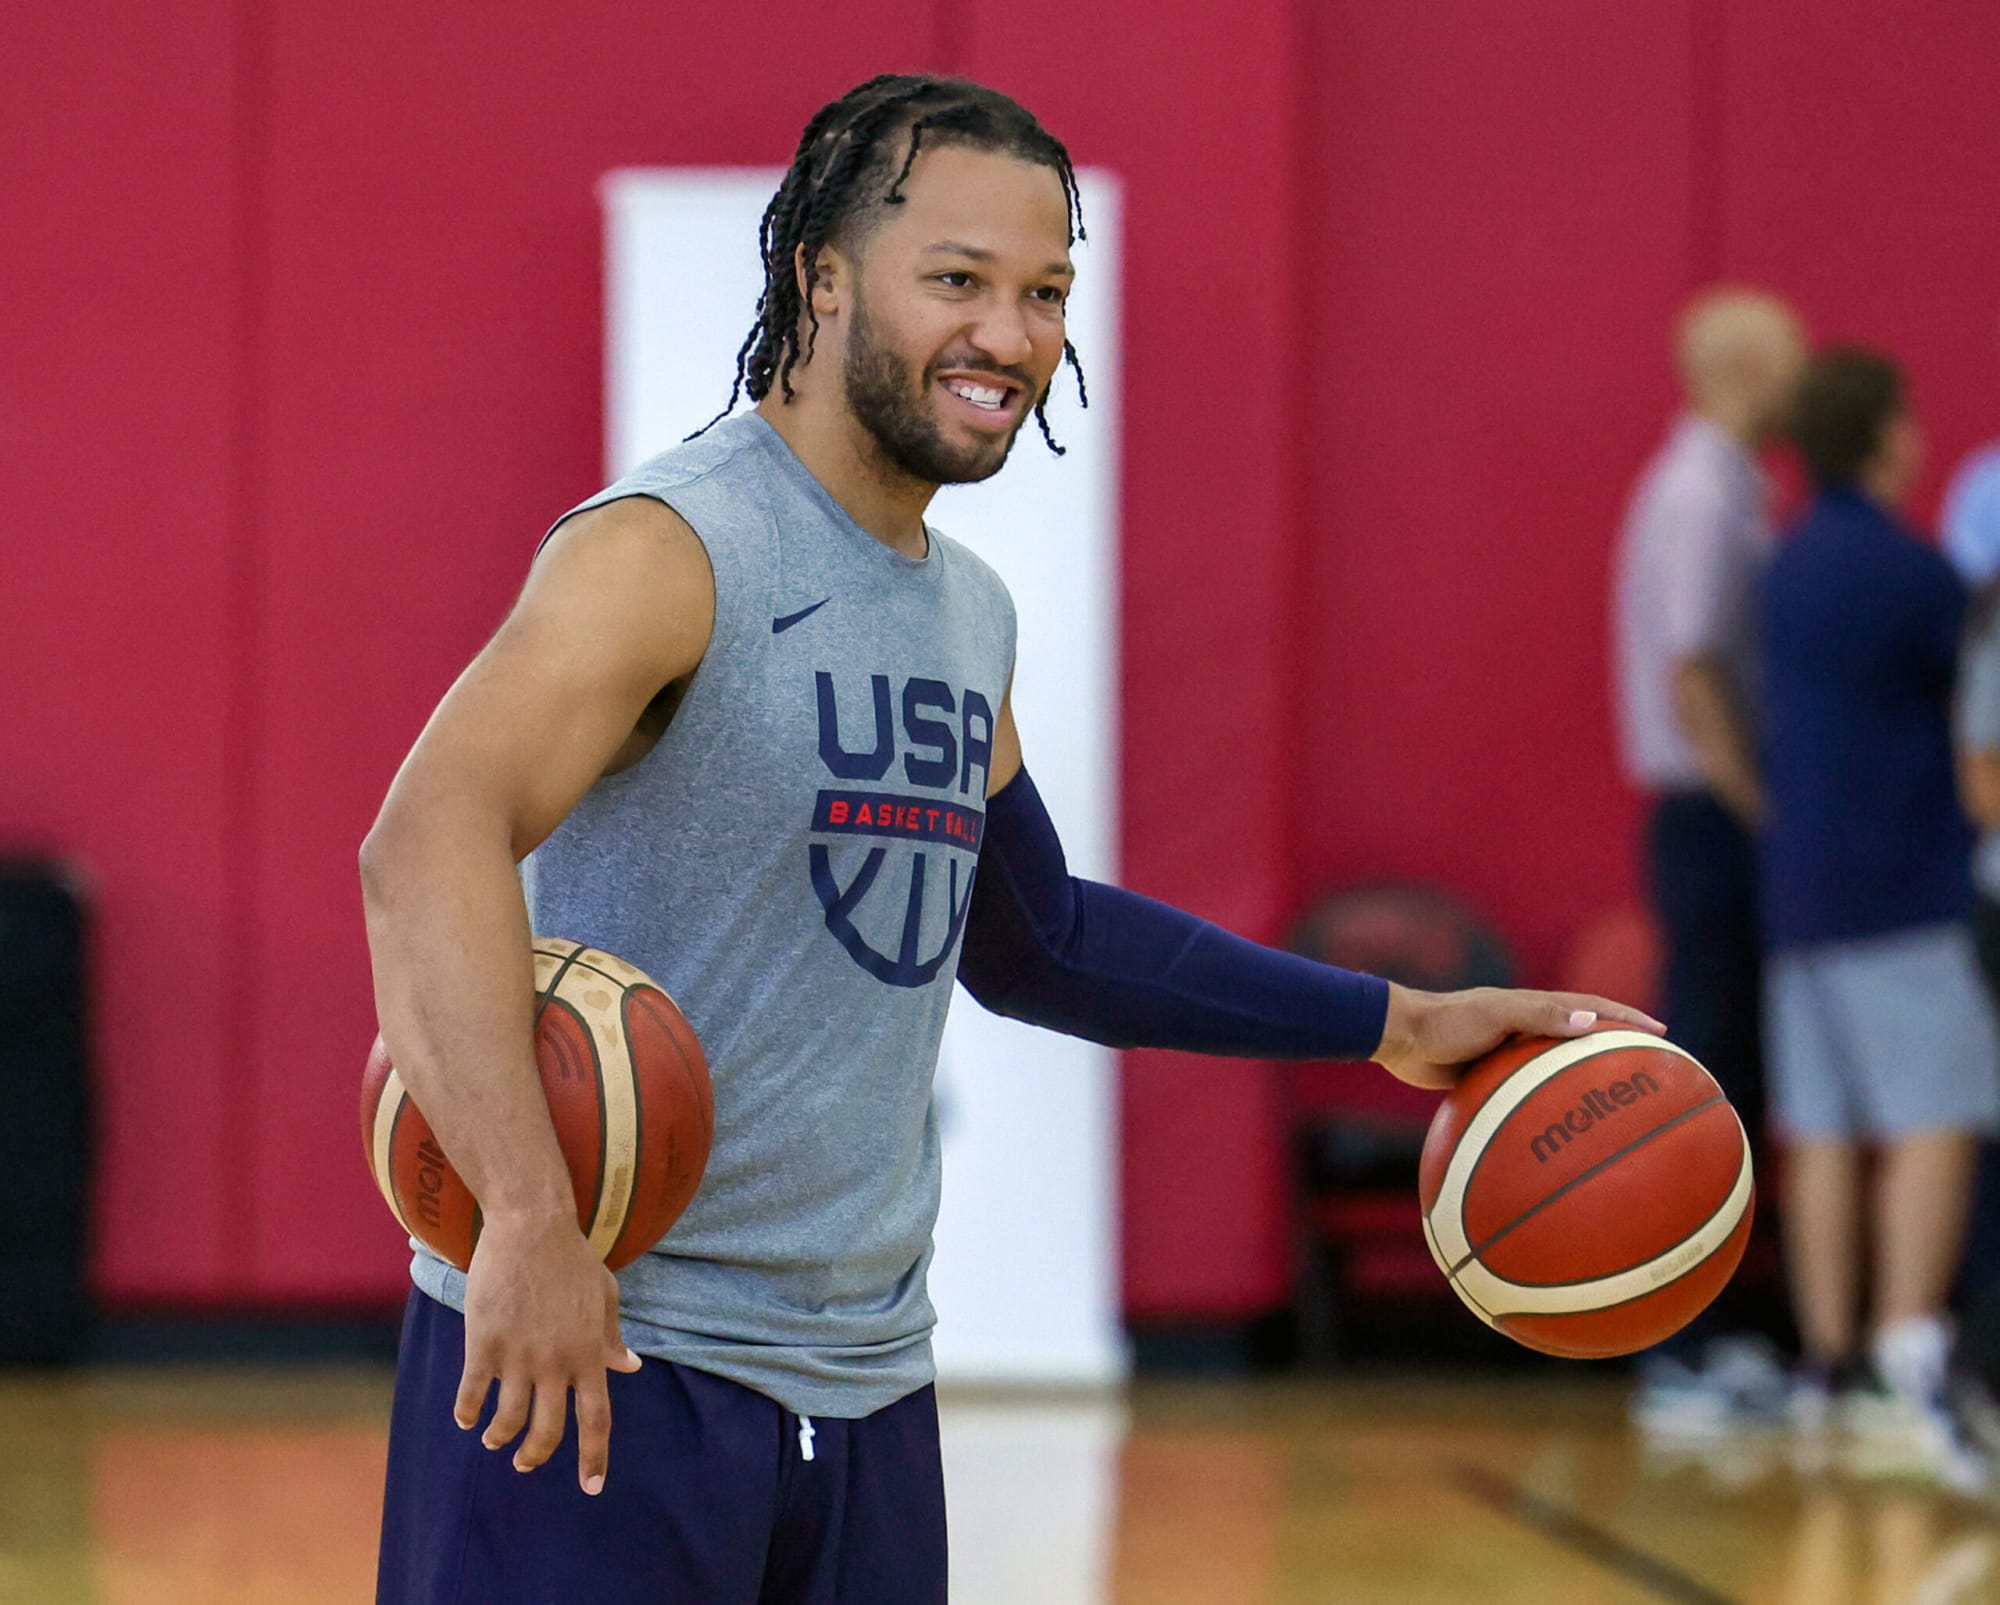 Knicks Star Jalen Brunson Hopes to 'Be a Great Leader' for Youth